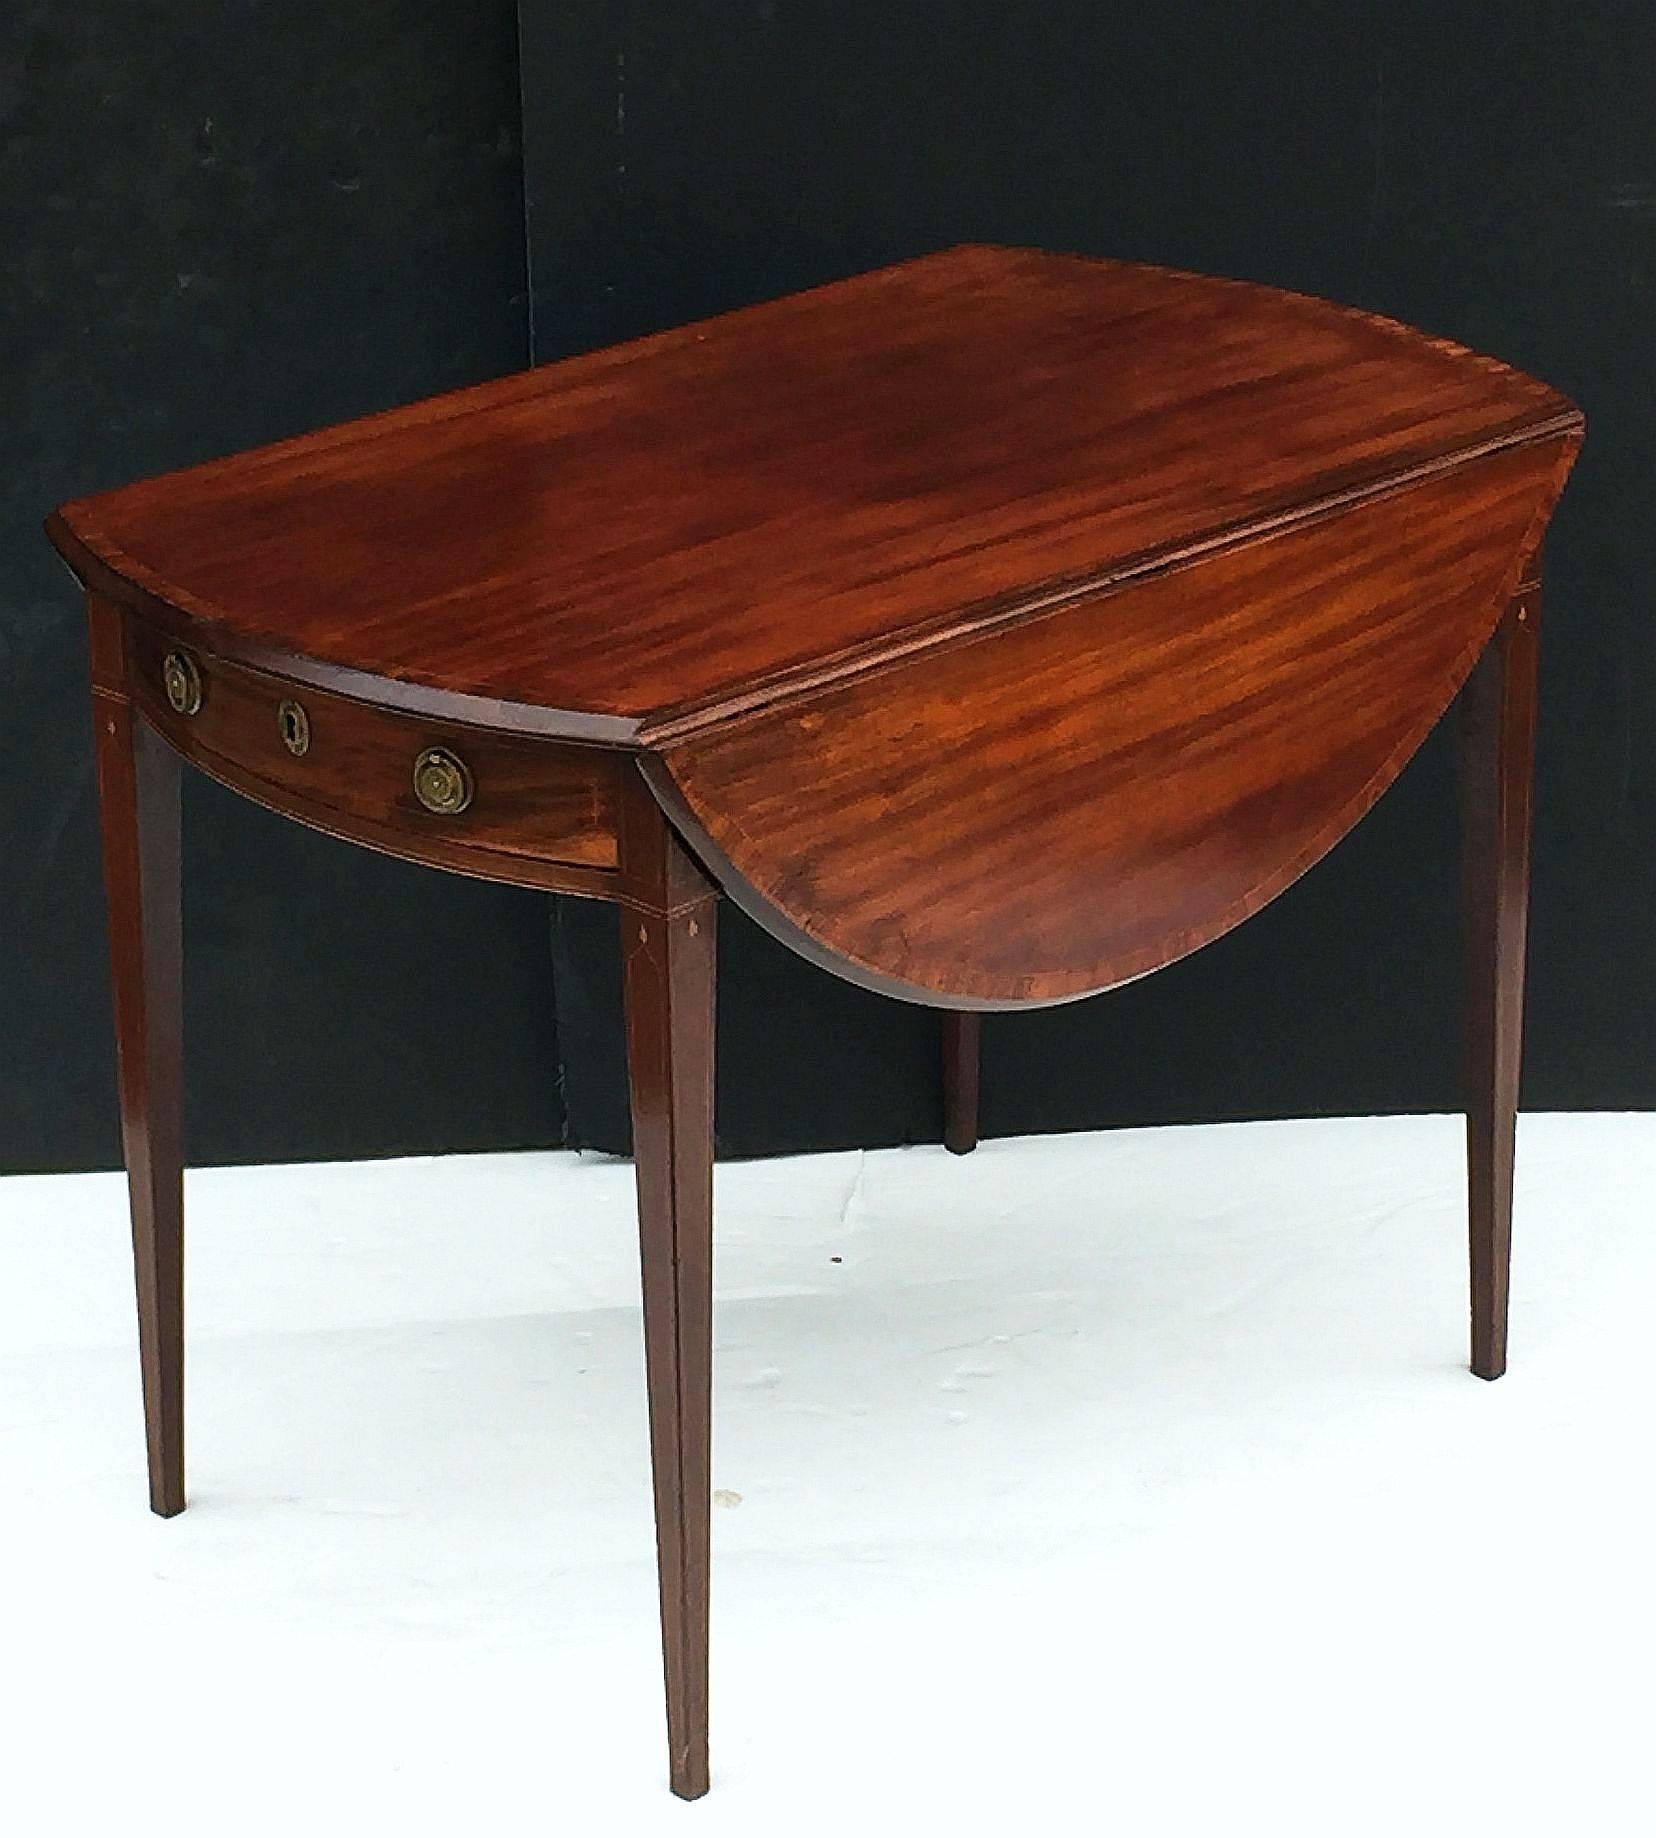 A fine English drop-leaf Pembroke table of mahogany in the manner of Sheraton, featuring a handsome oval top with crossbanding and fold-down sides, over a frieze with strung inlay, bowed drawer, and brass hardware, set upon four tapering legs with